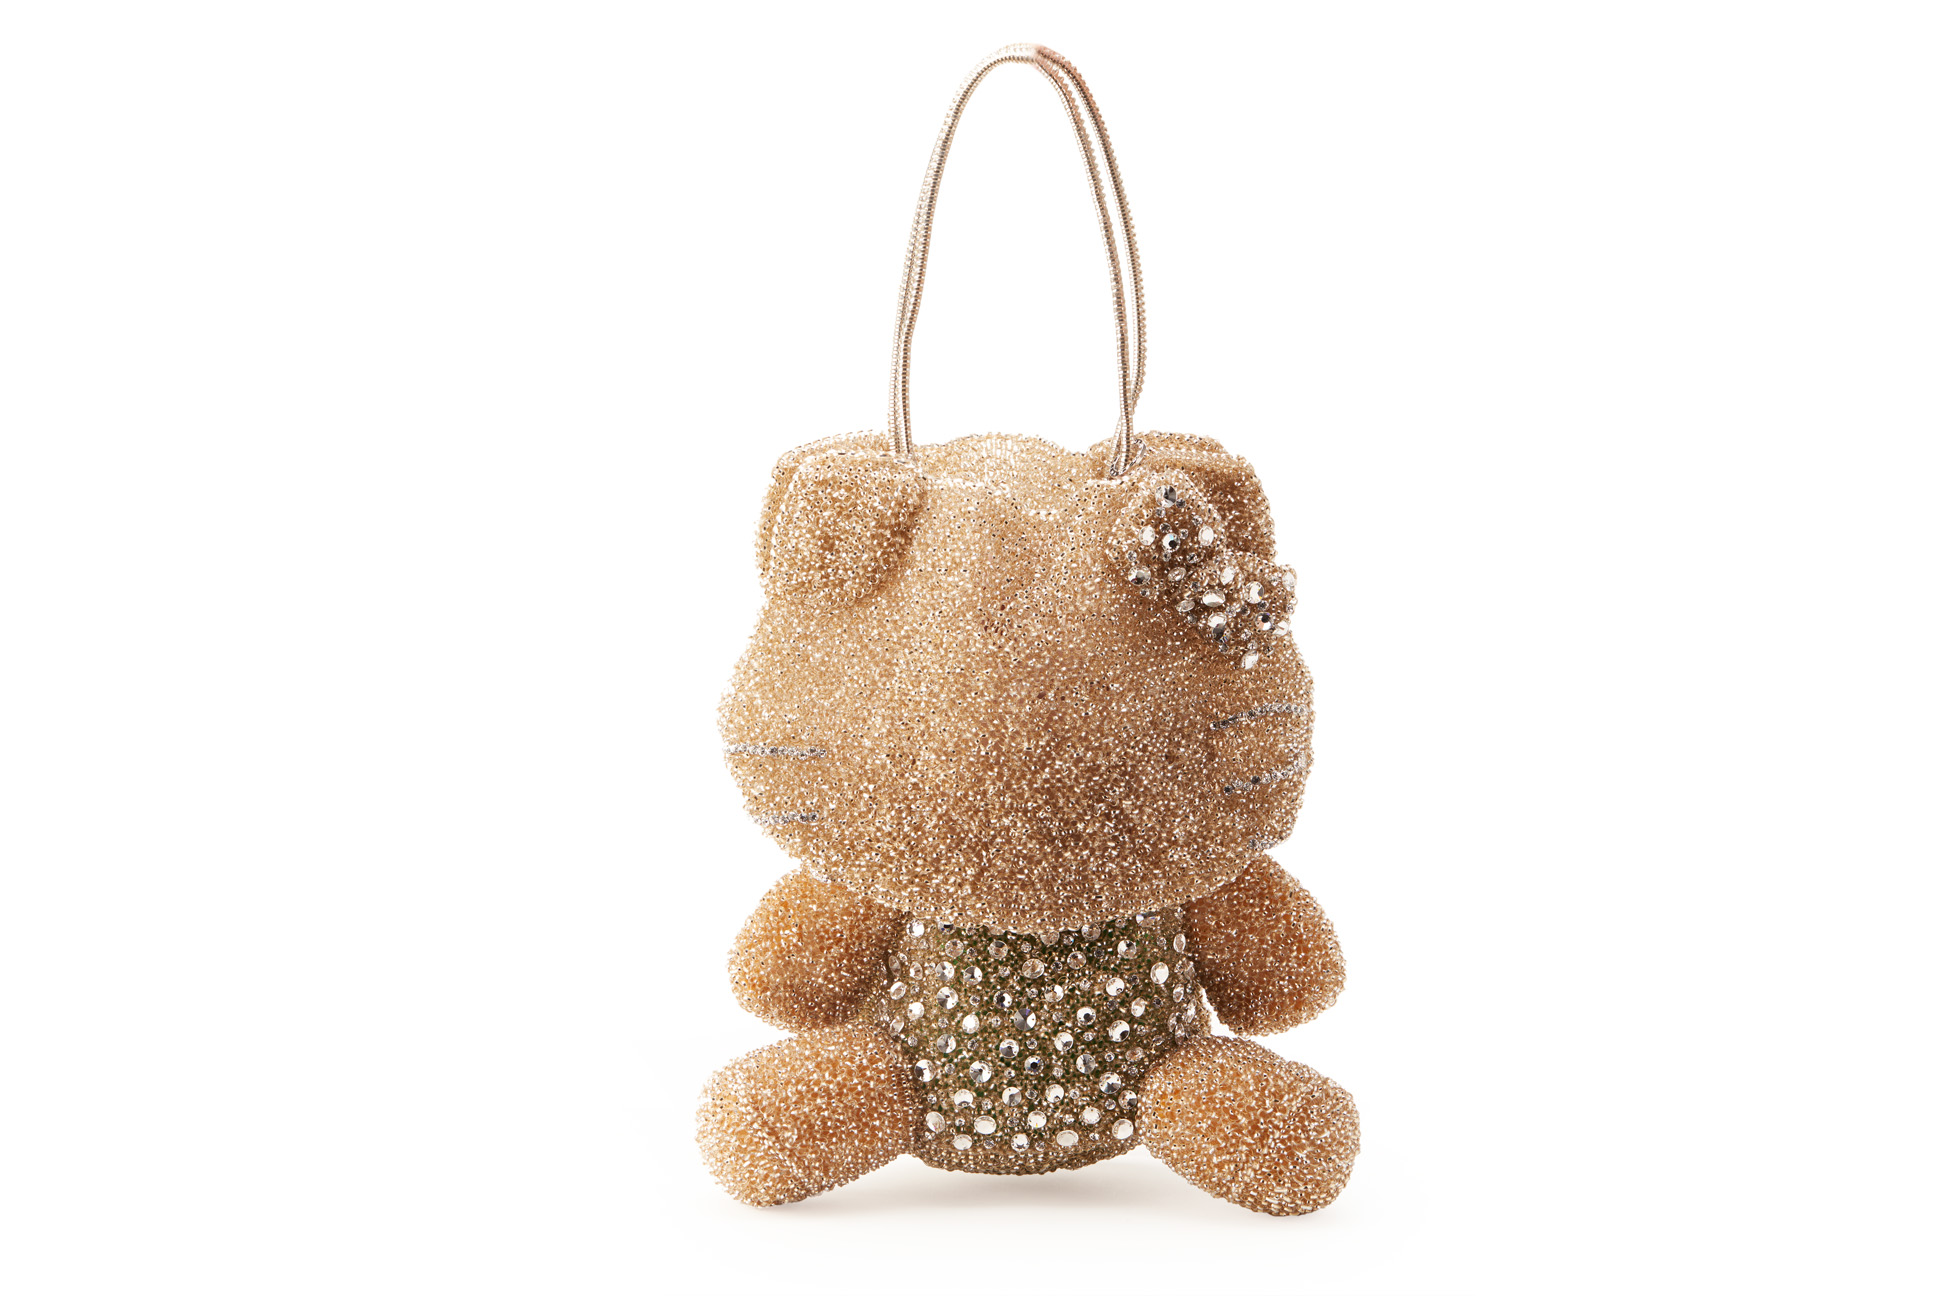 AN ANTEPRIMA 'HELLO KITTY' GOLD SILVER WIRE BAG